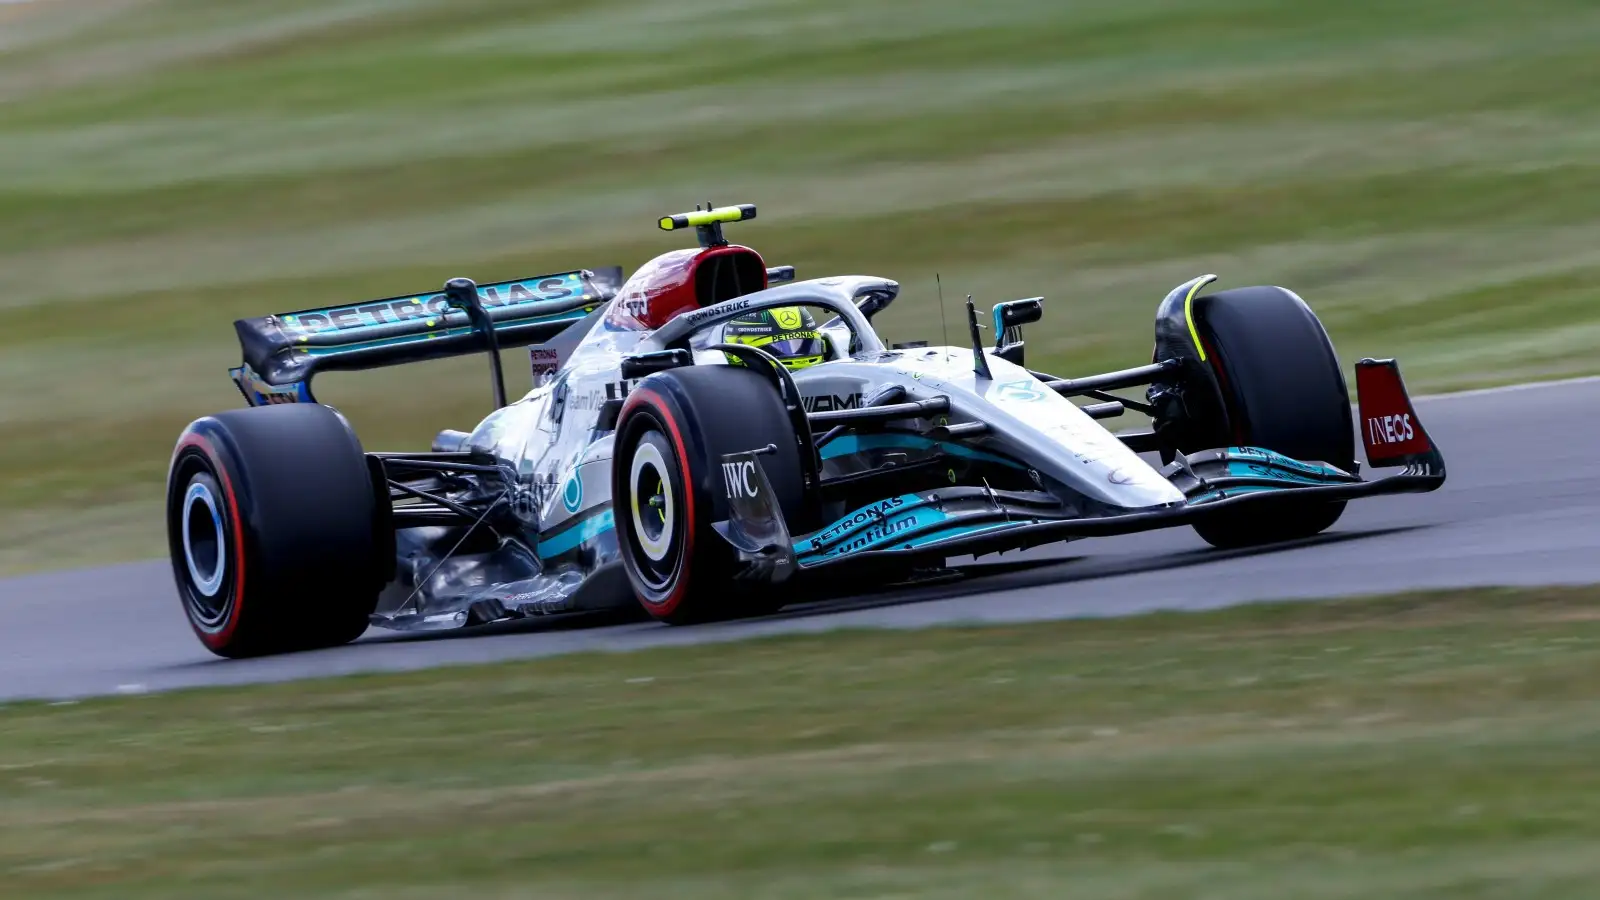 Lewis Hamilton in the Mercedes W13 during practice. England, July 2022.